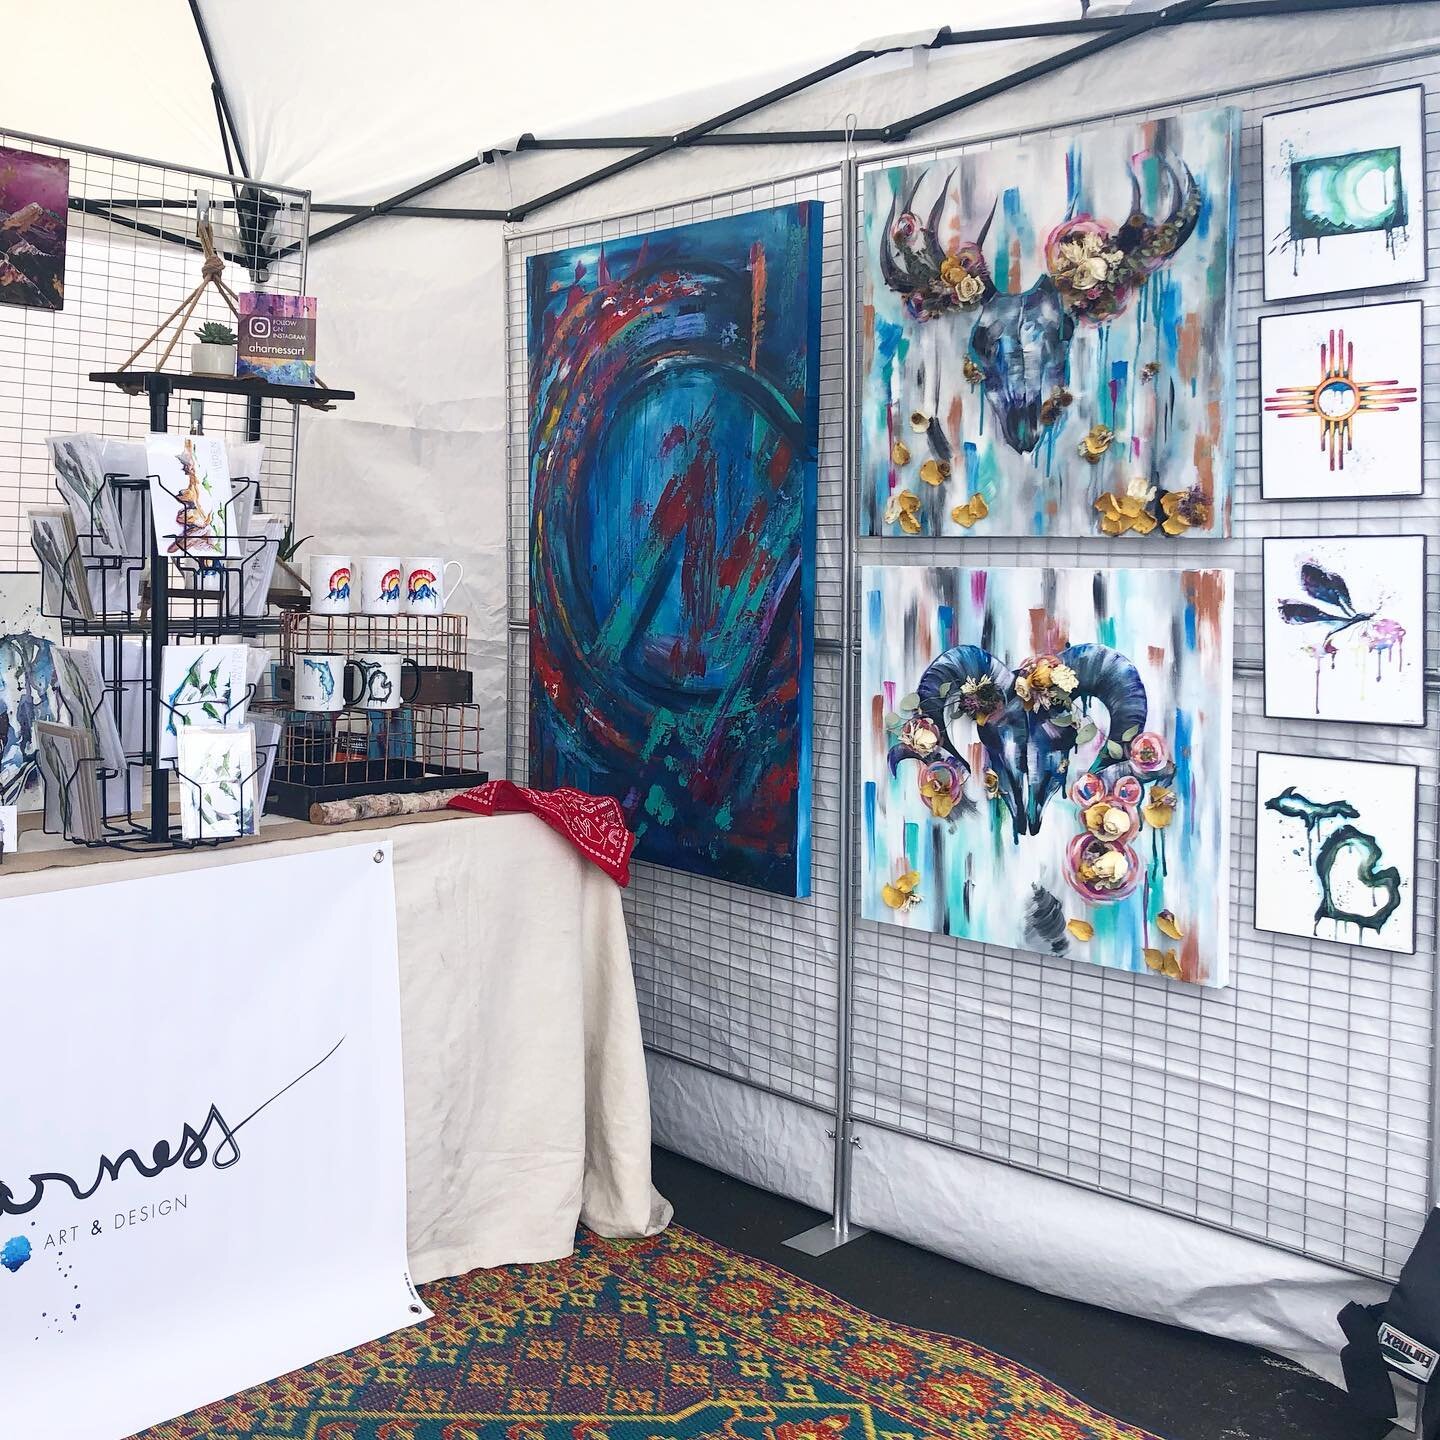 #tbt to @horseshoemarket a couple of weekends ago! Always one of my favorite art shows to participate in. 👌🏻✨
.
.
.
#horseshoemarket #luckyfinds #artfestival #makersgonnamake #artsy #art #artshow #festival #showcase #artwork #painting #artdaily #ar